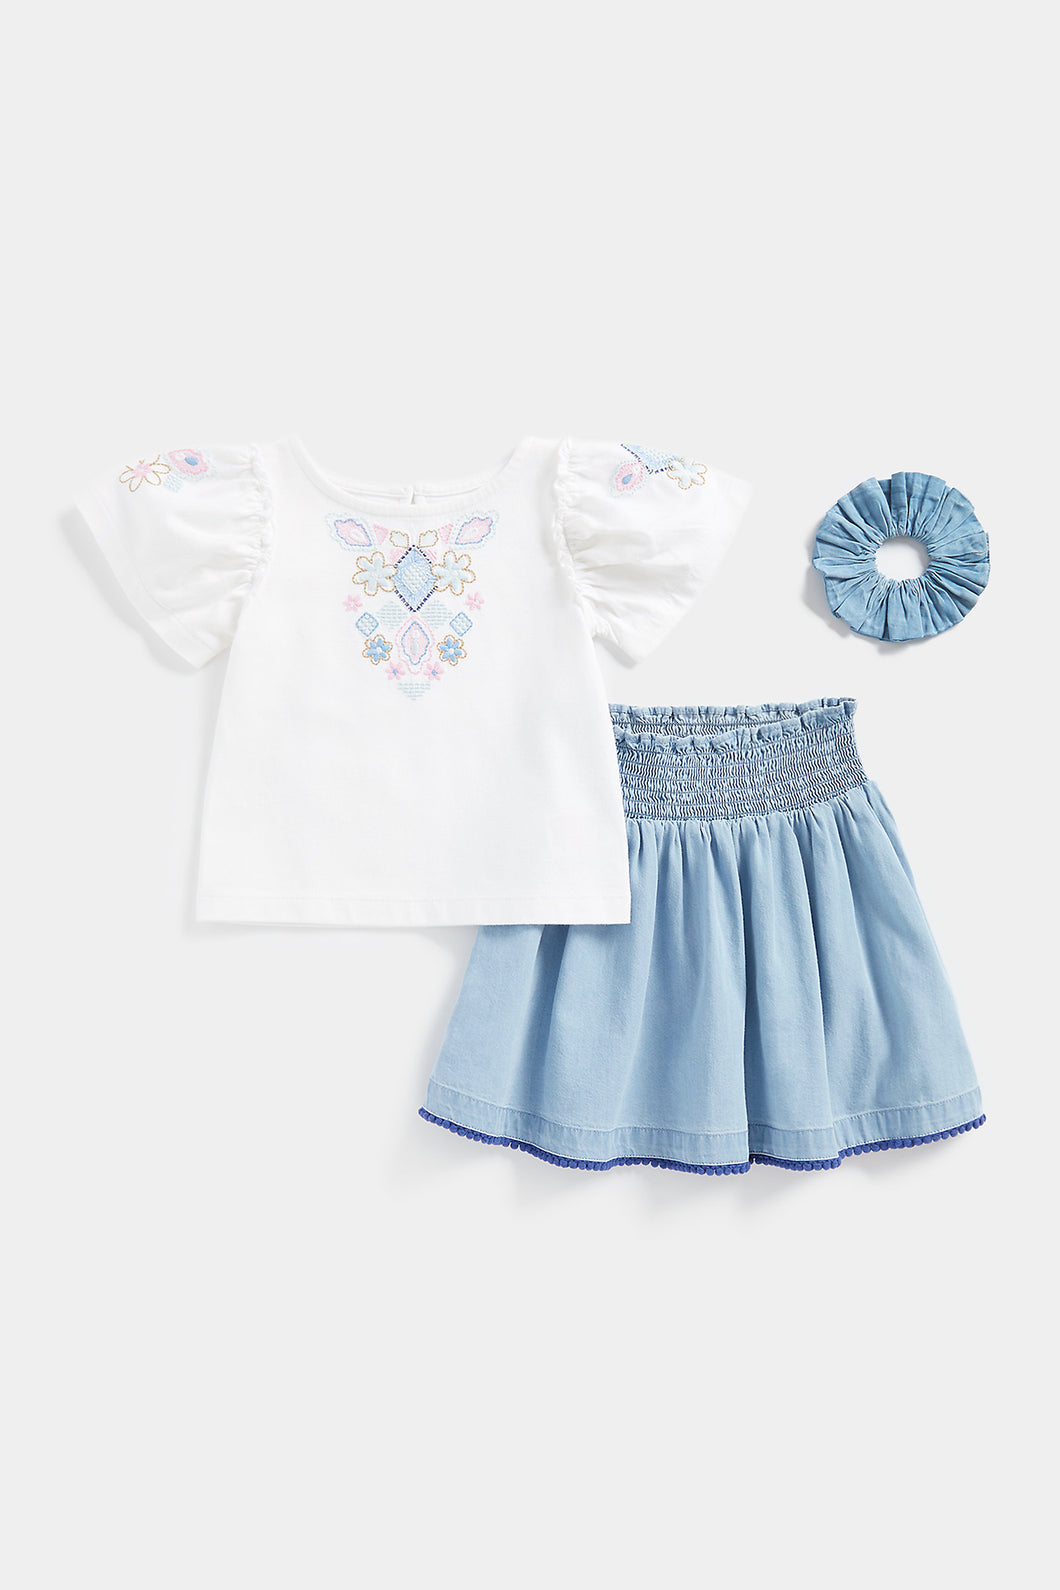 Mothercare T-Shirt, Skirt and Hair Tie Set